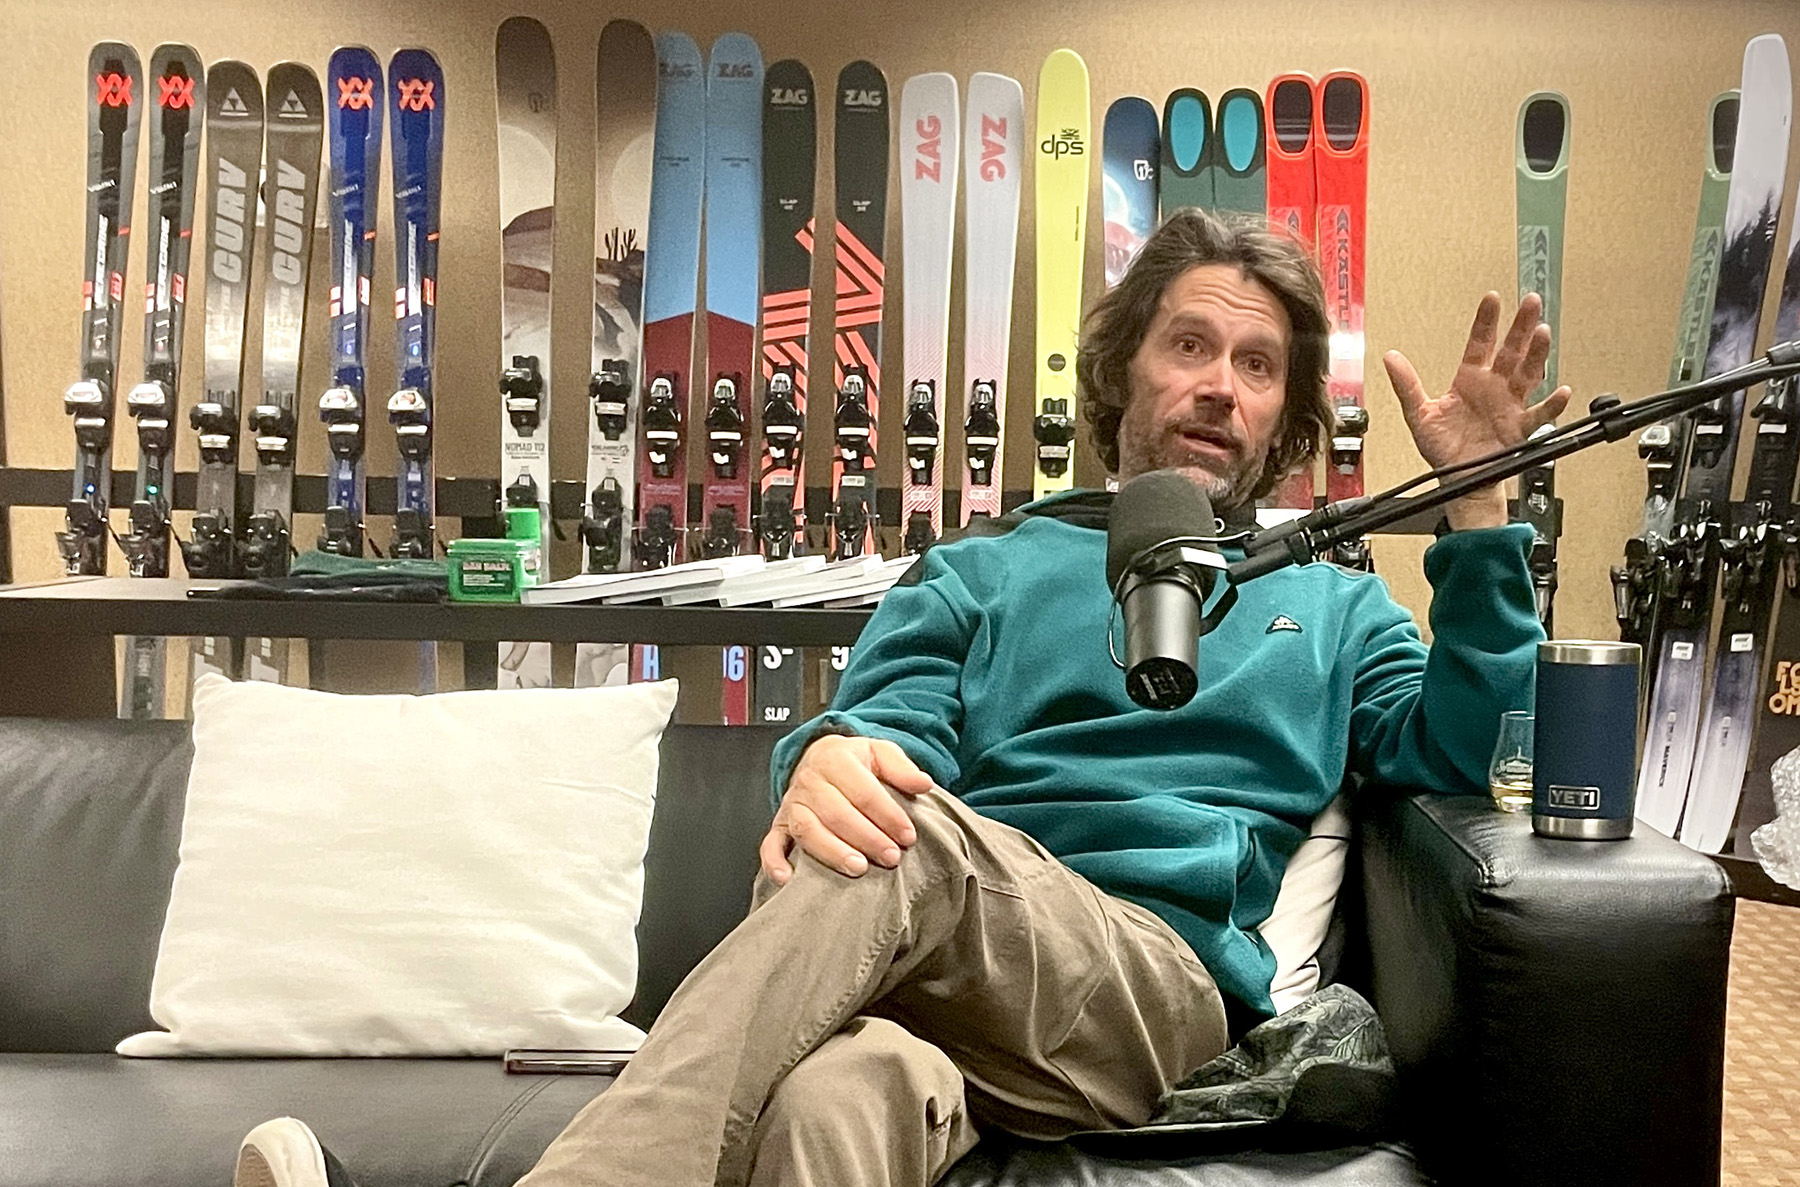 Jeremy Jones was in town last week, so in addition to getting out on snow together, we sat down in Blister HQ in Elevation Hotel to record a GEAR:30 podcast and talk about gear reviews; the biggest gear mistakes riders make; full-camber vs. no-camber boards; soft vs. hard boots (including Shane McConkey’s tinkering on that front); and more.